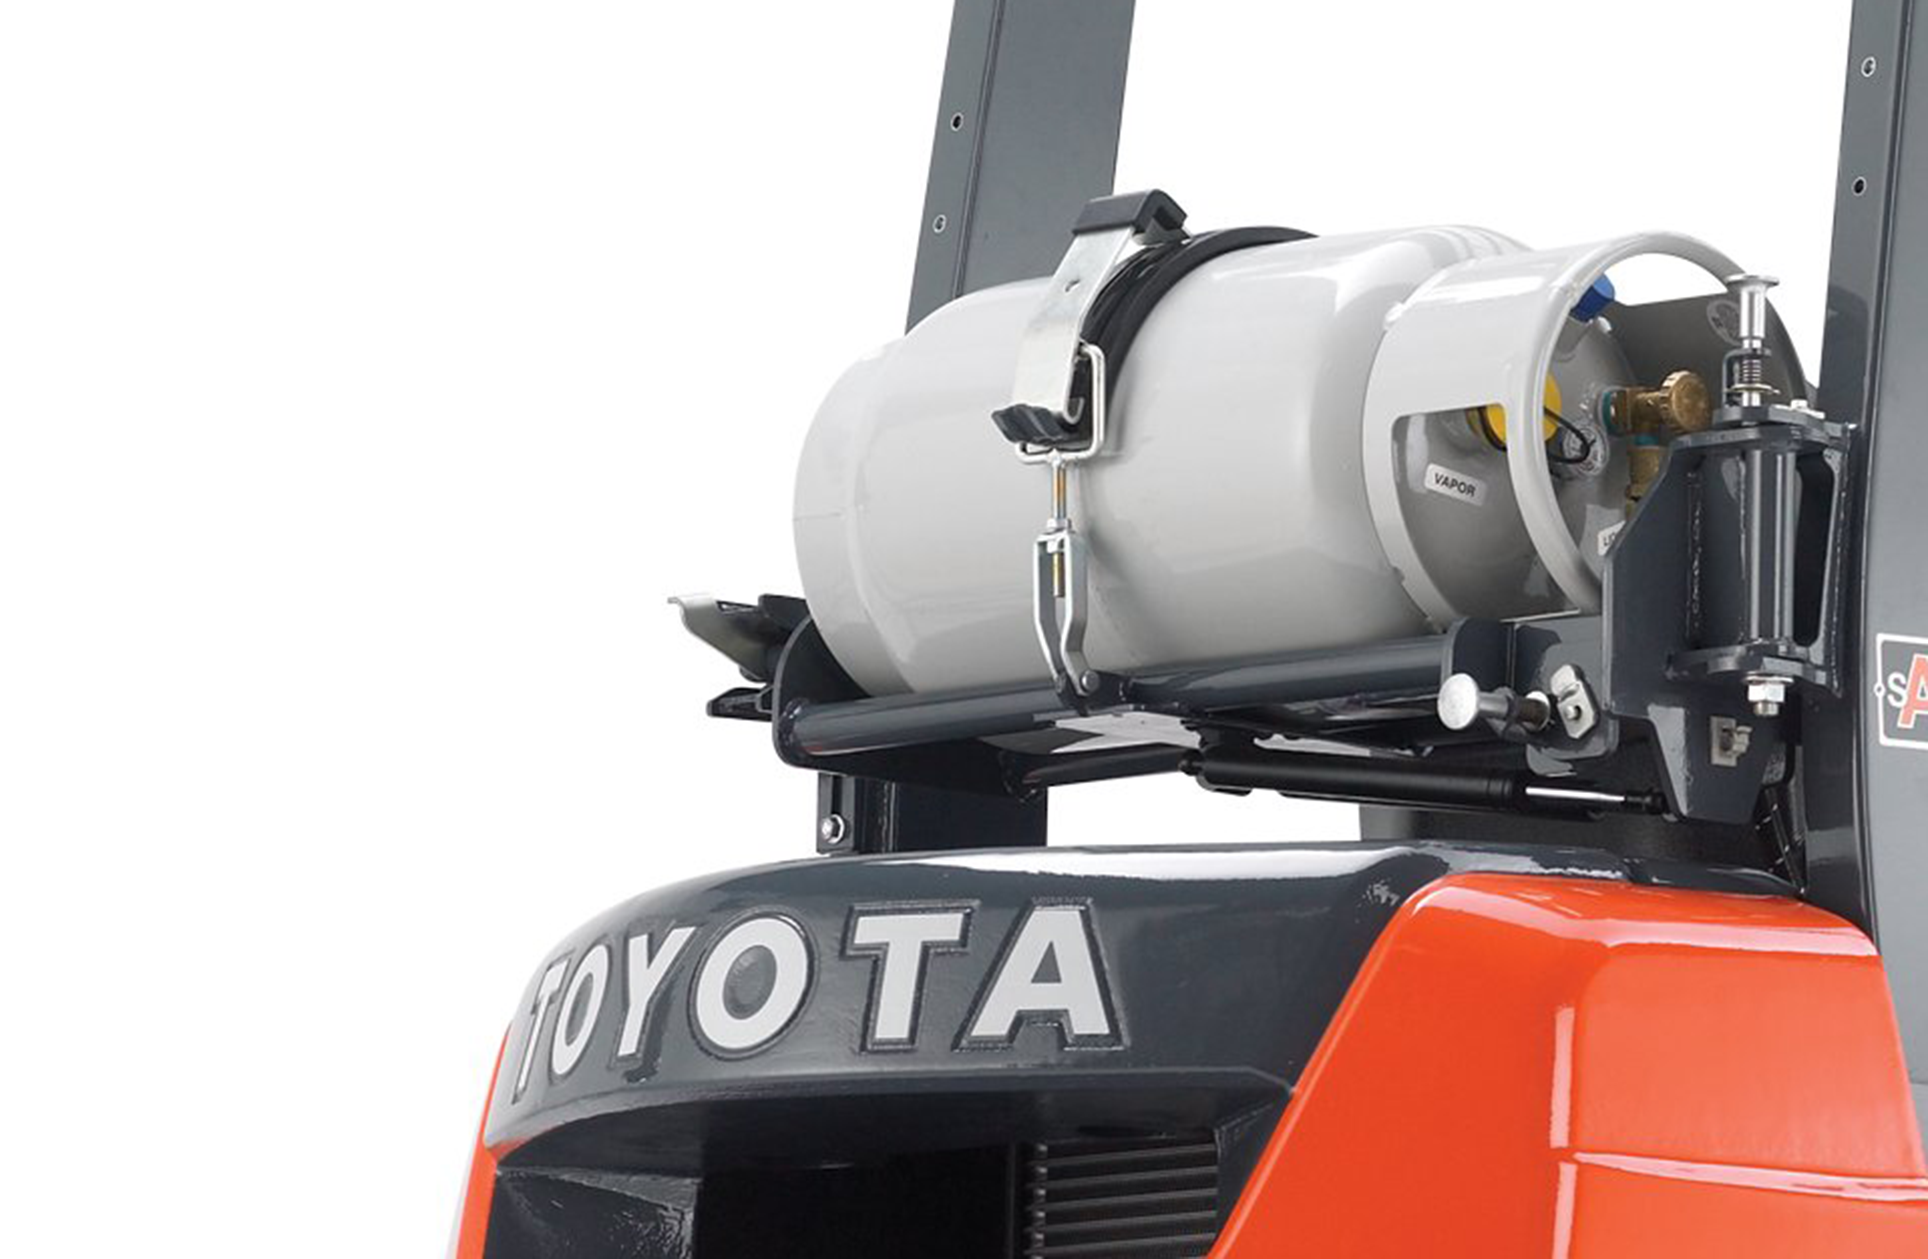 Close-up image of the rear side of Toyota's Core Pneumatic forklift.